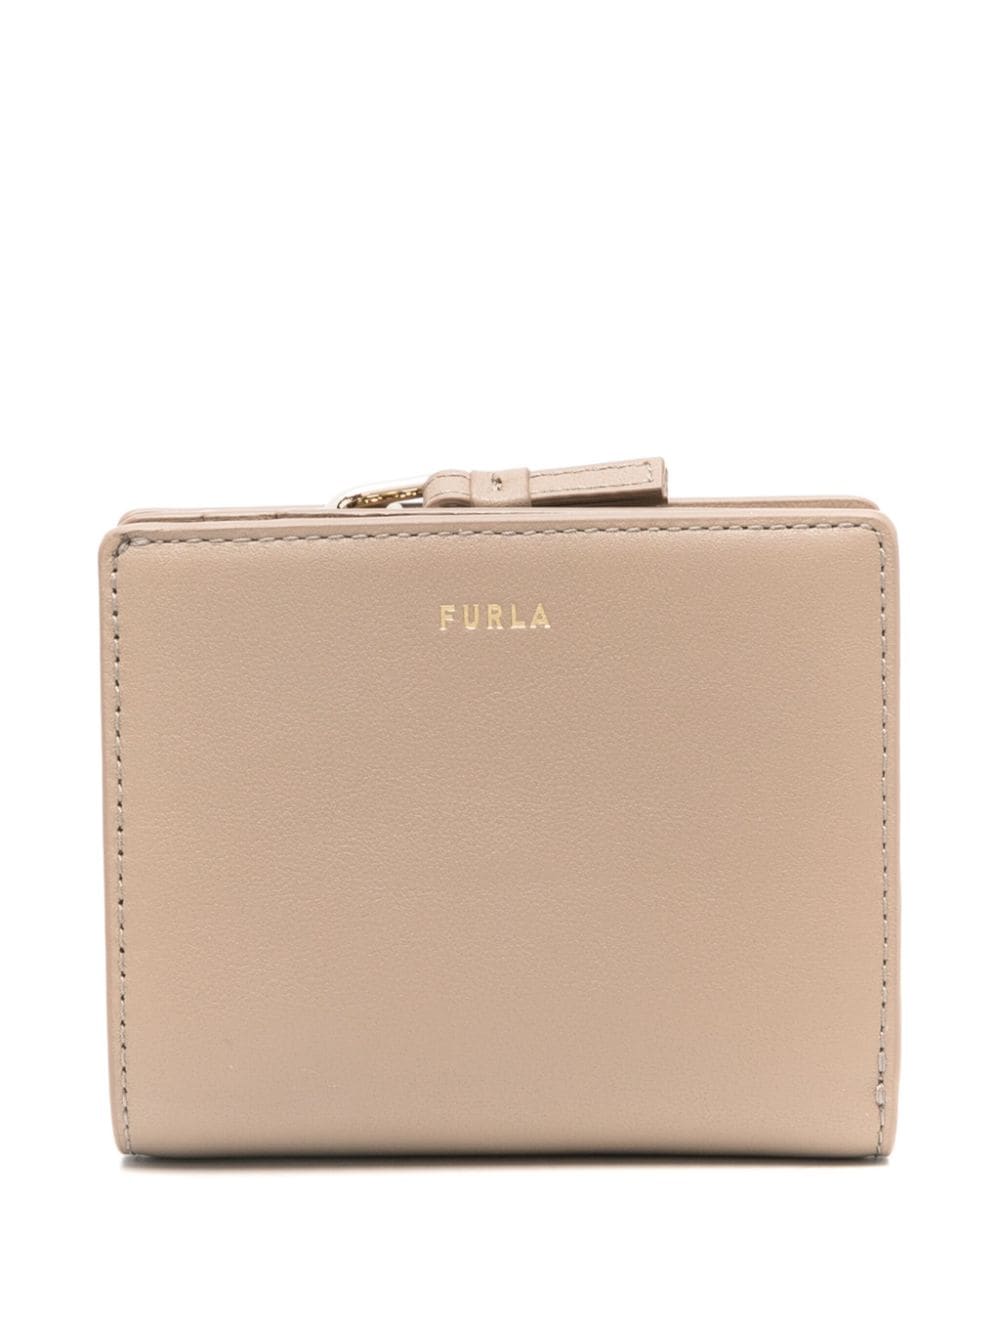 Furla Camelia Leather Wallet In Neutral